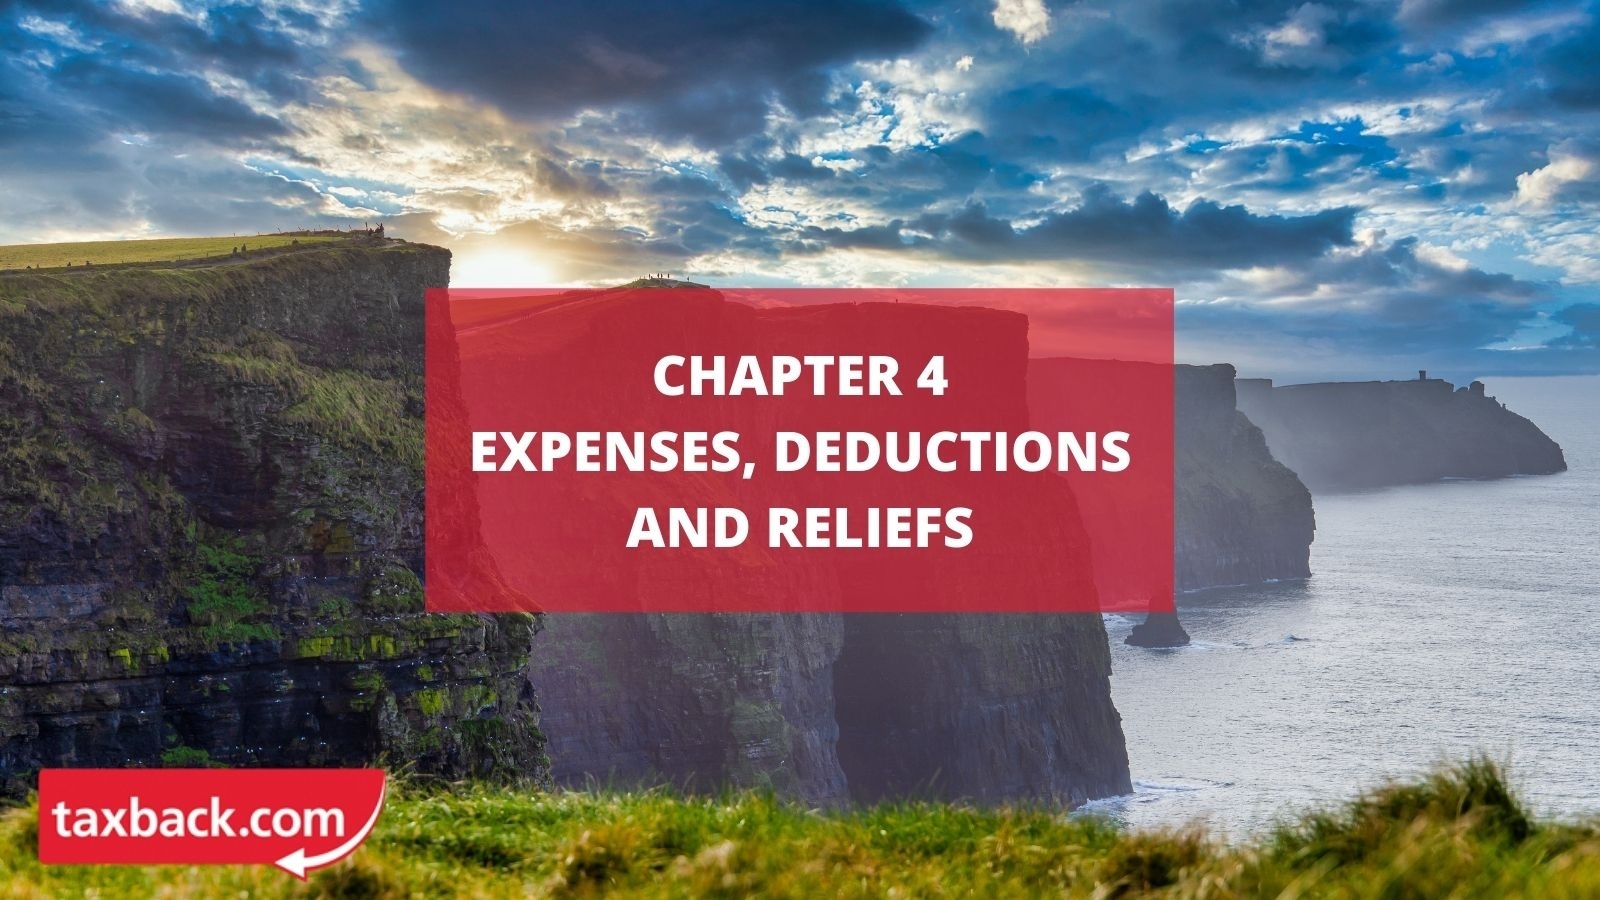 Chapter 4 - Expenses, Deduction and Reliefs